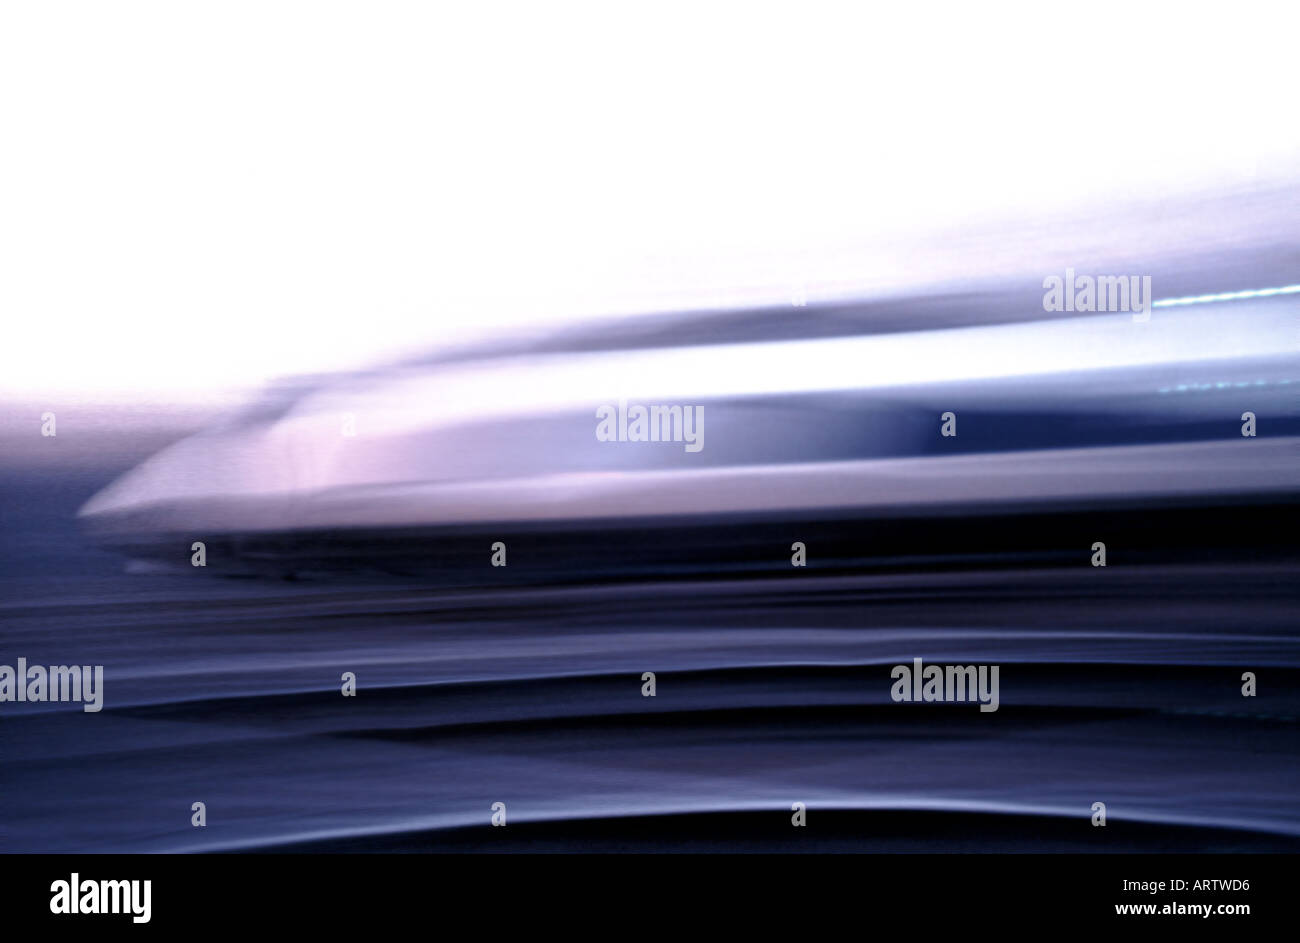 France, High Speed, T.G.V Bullet Train in blurred motion,  Industry Technology Stock Photo